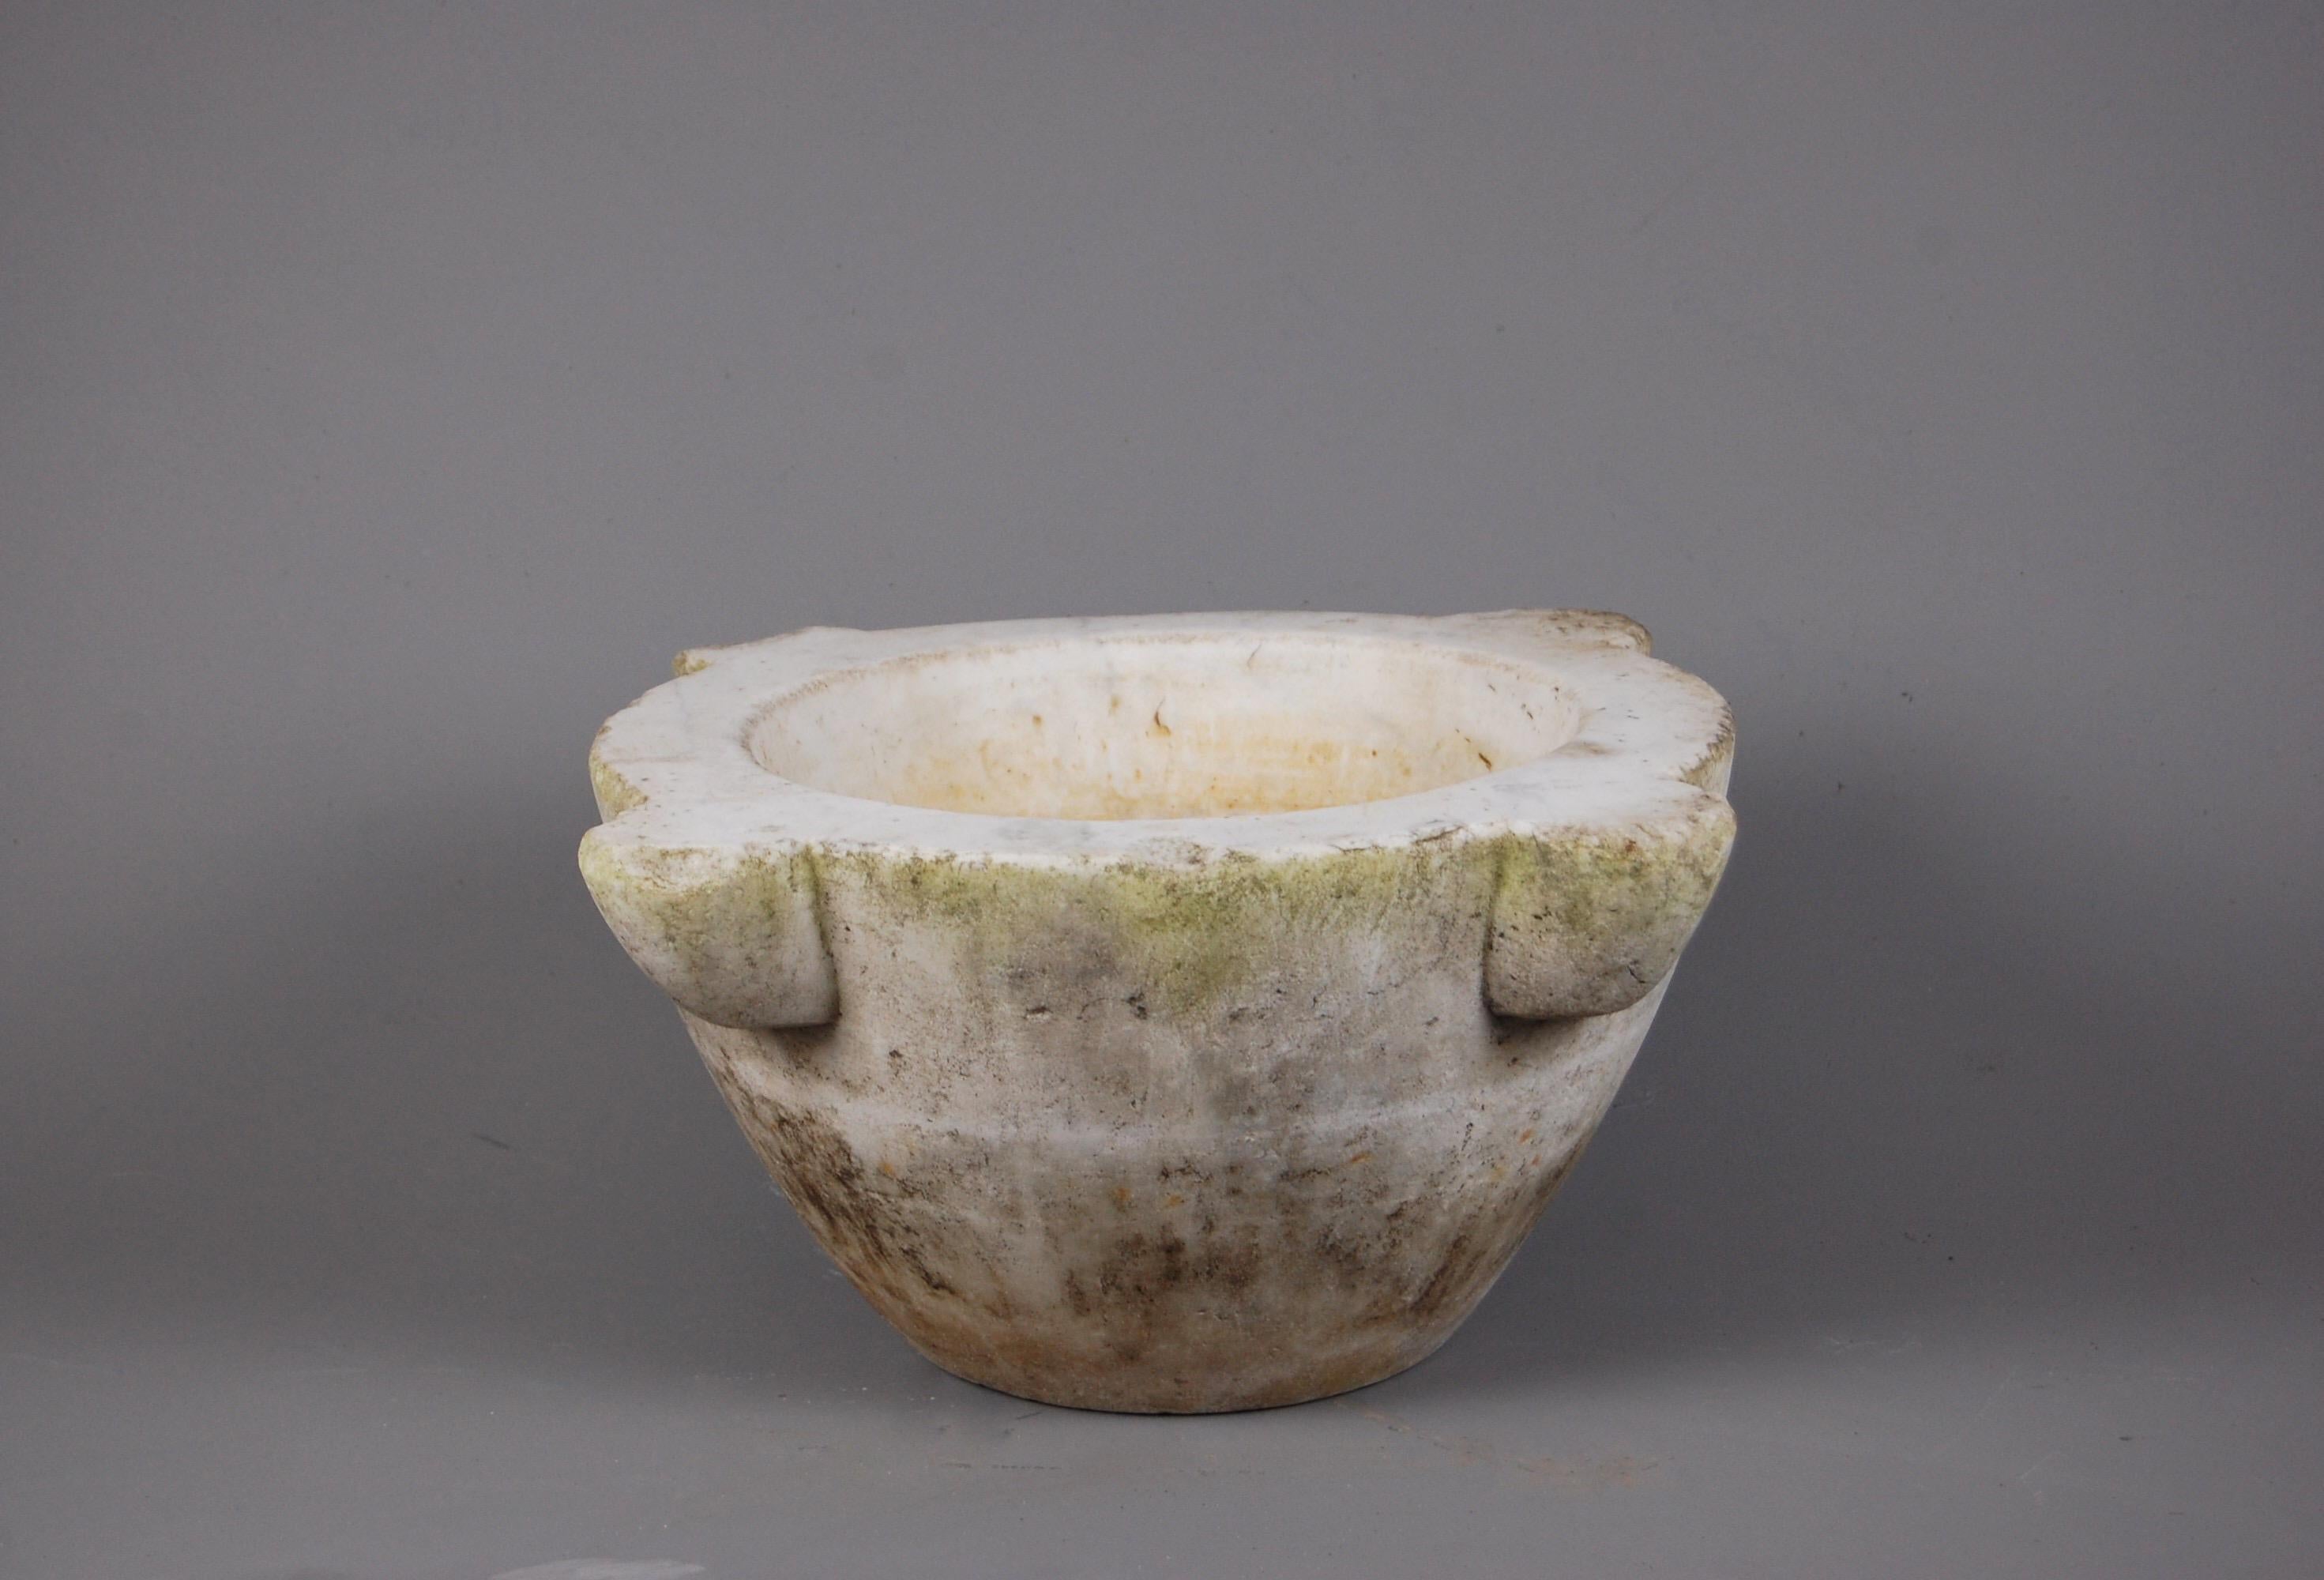 19th century Apothecary mortar in marble, expected wear and use, with minor chips and losses throughout. A nice large scale example, lightly weathered, ideal for interior or exterior use.